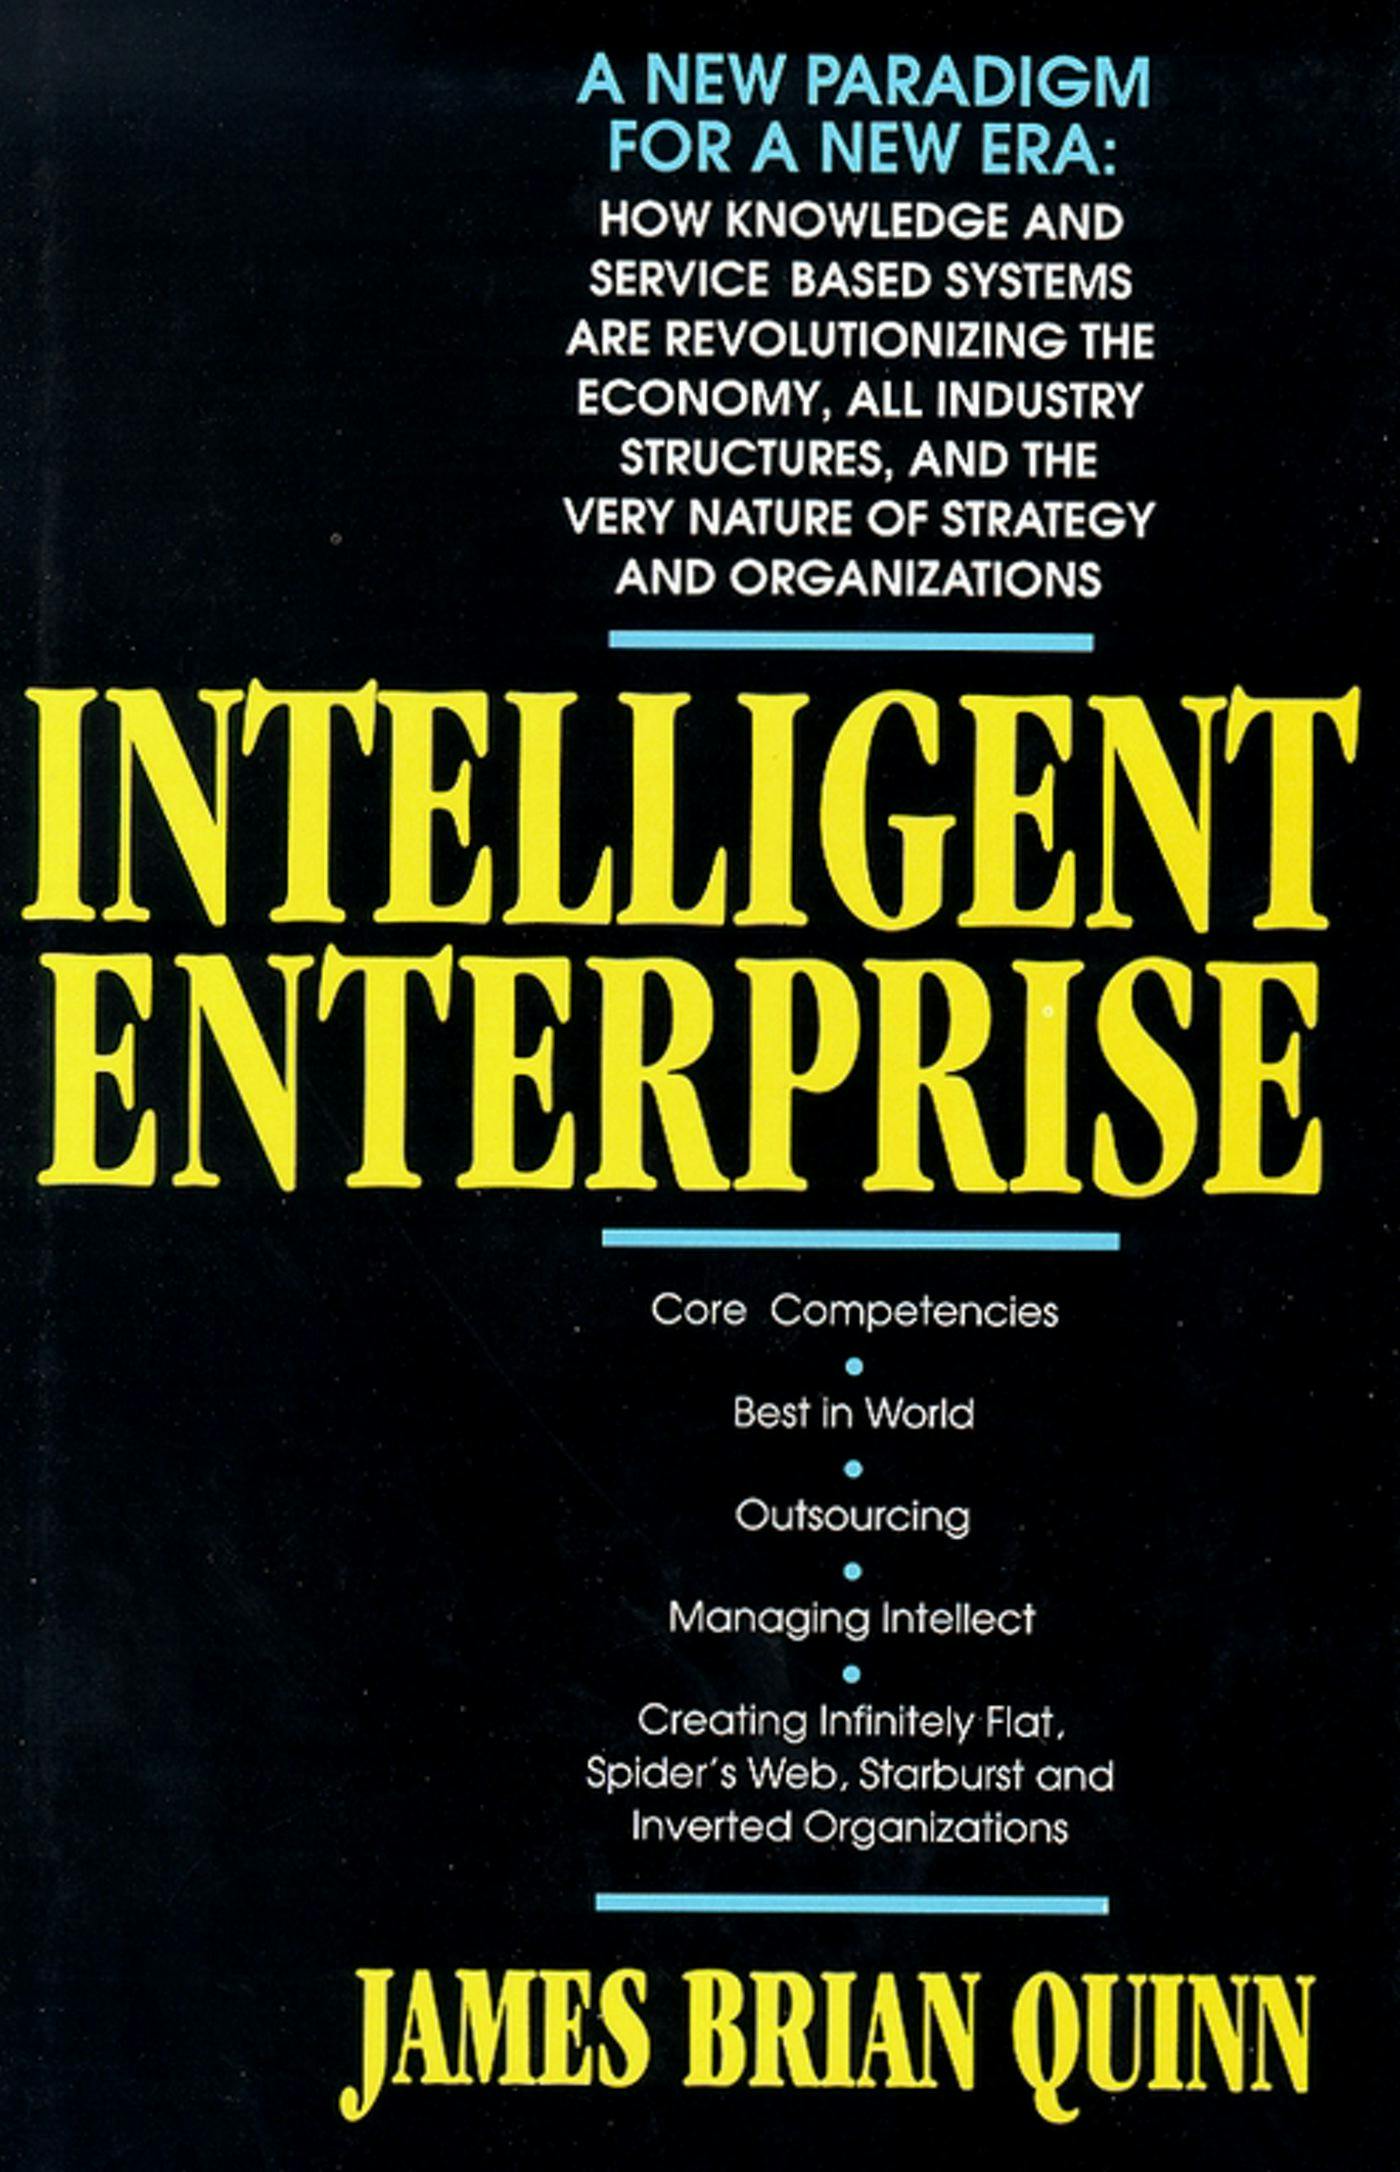 Intelligent Enterprise: A Knowledge and Service Based Paradigm for Industr - James Brian Quinn